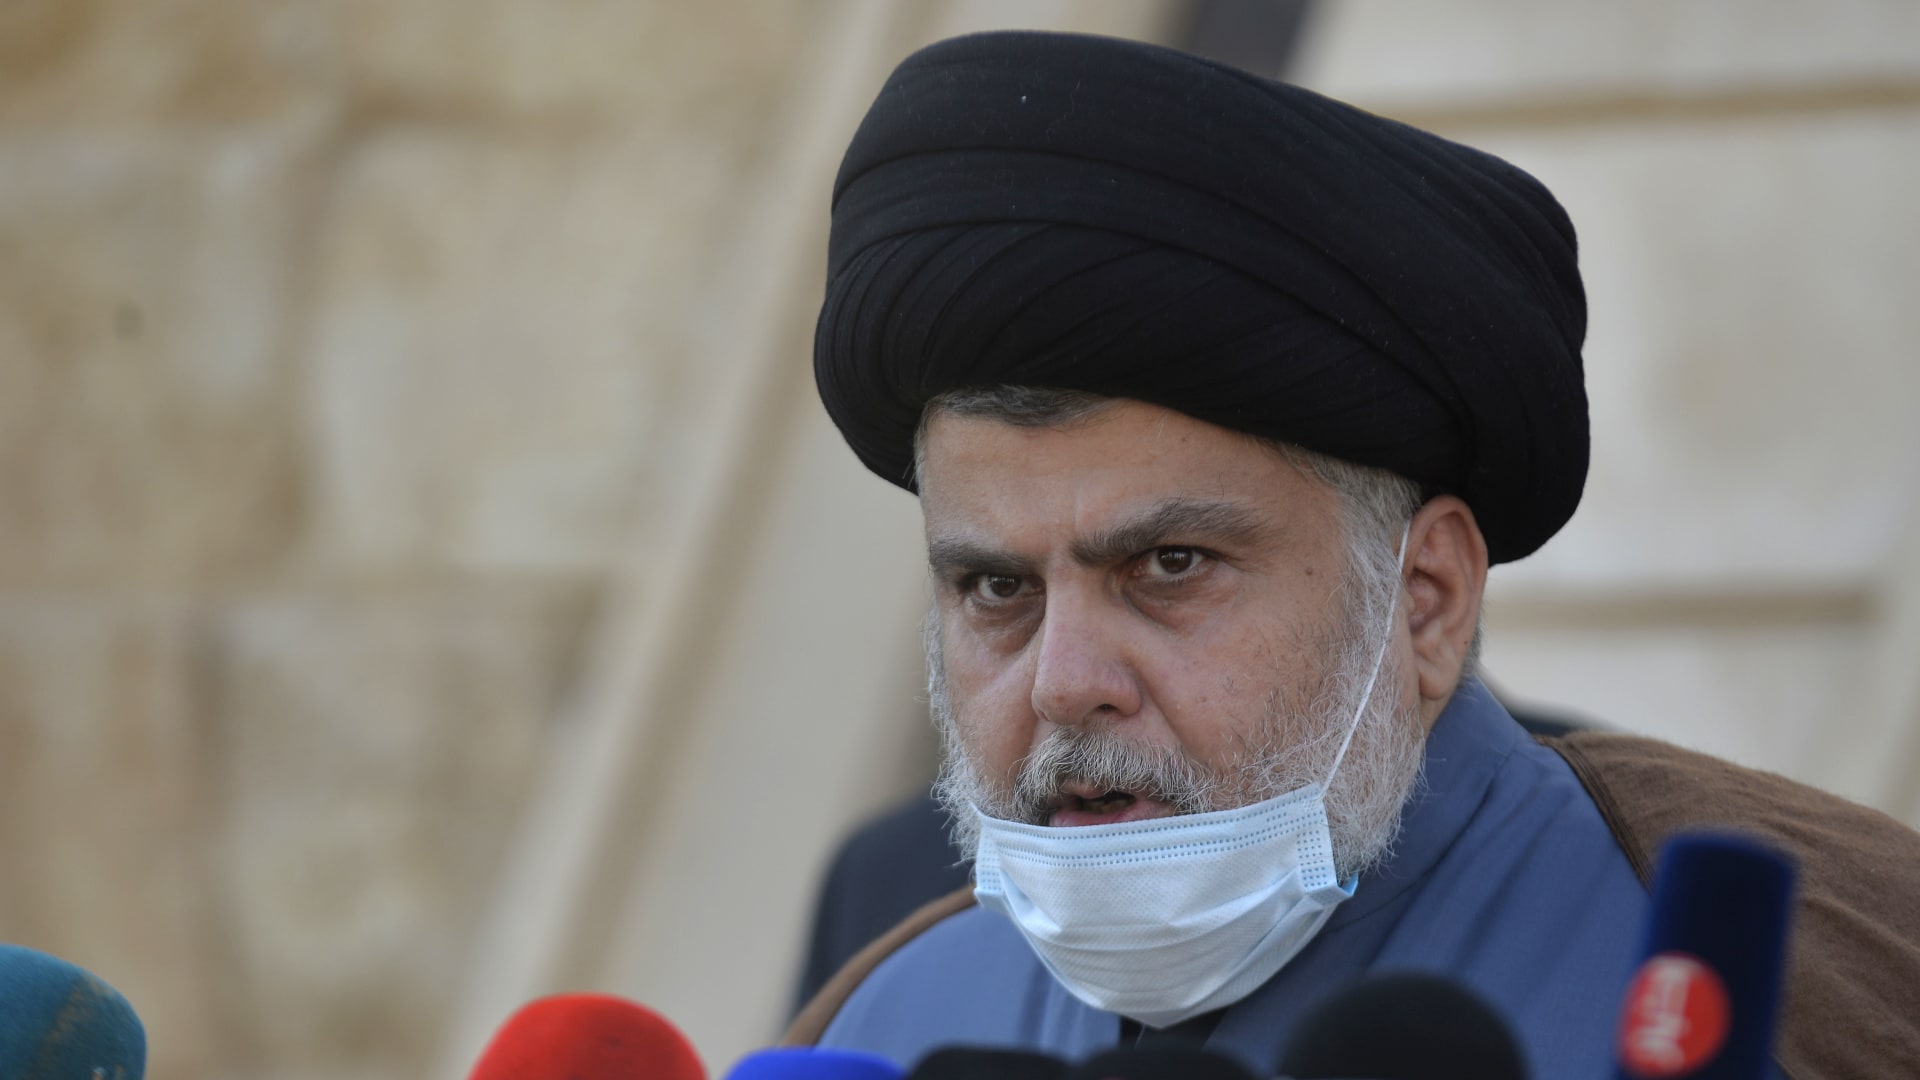 In the aftermath of the Peshawar terror attack, Al-Sadr calls for "closing ranks"